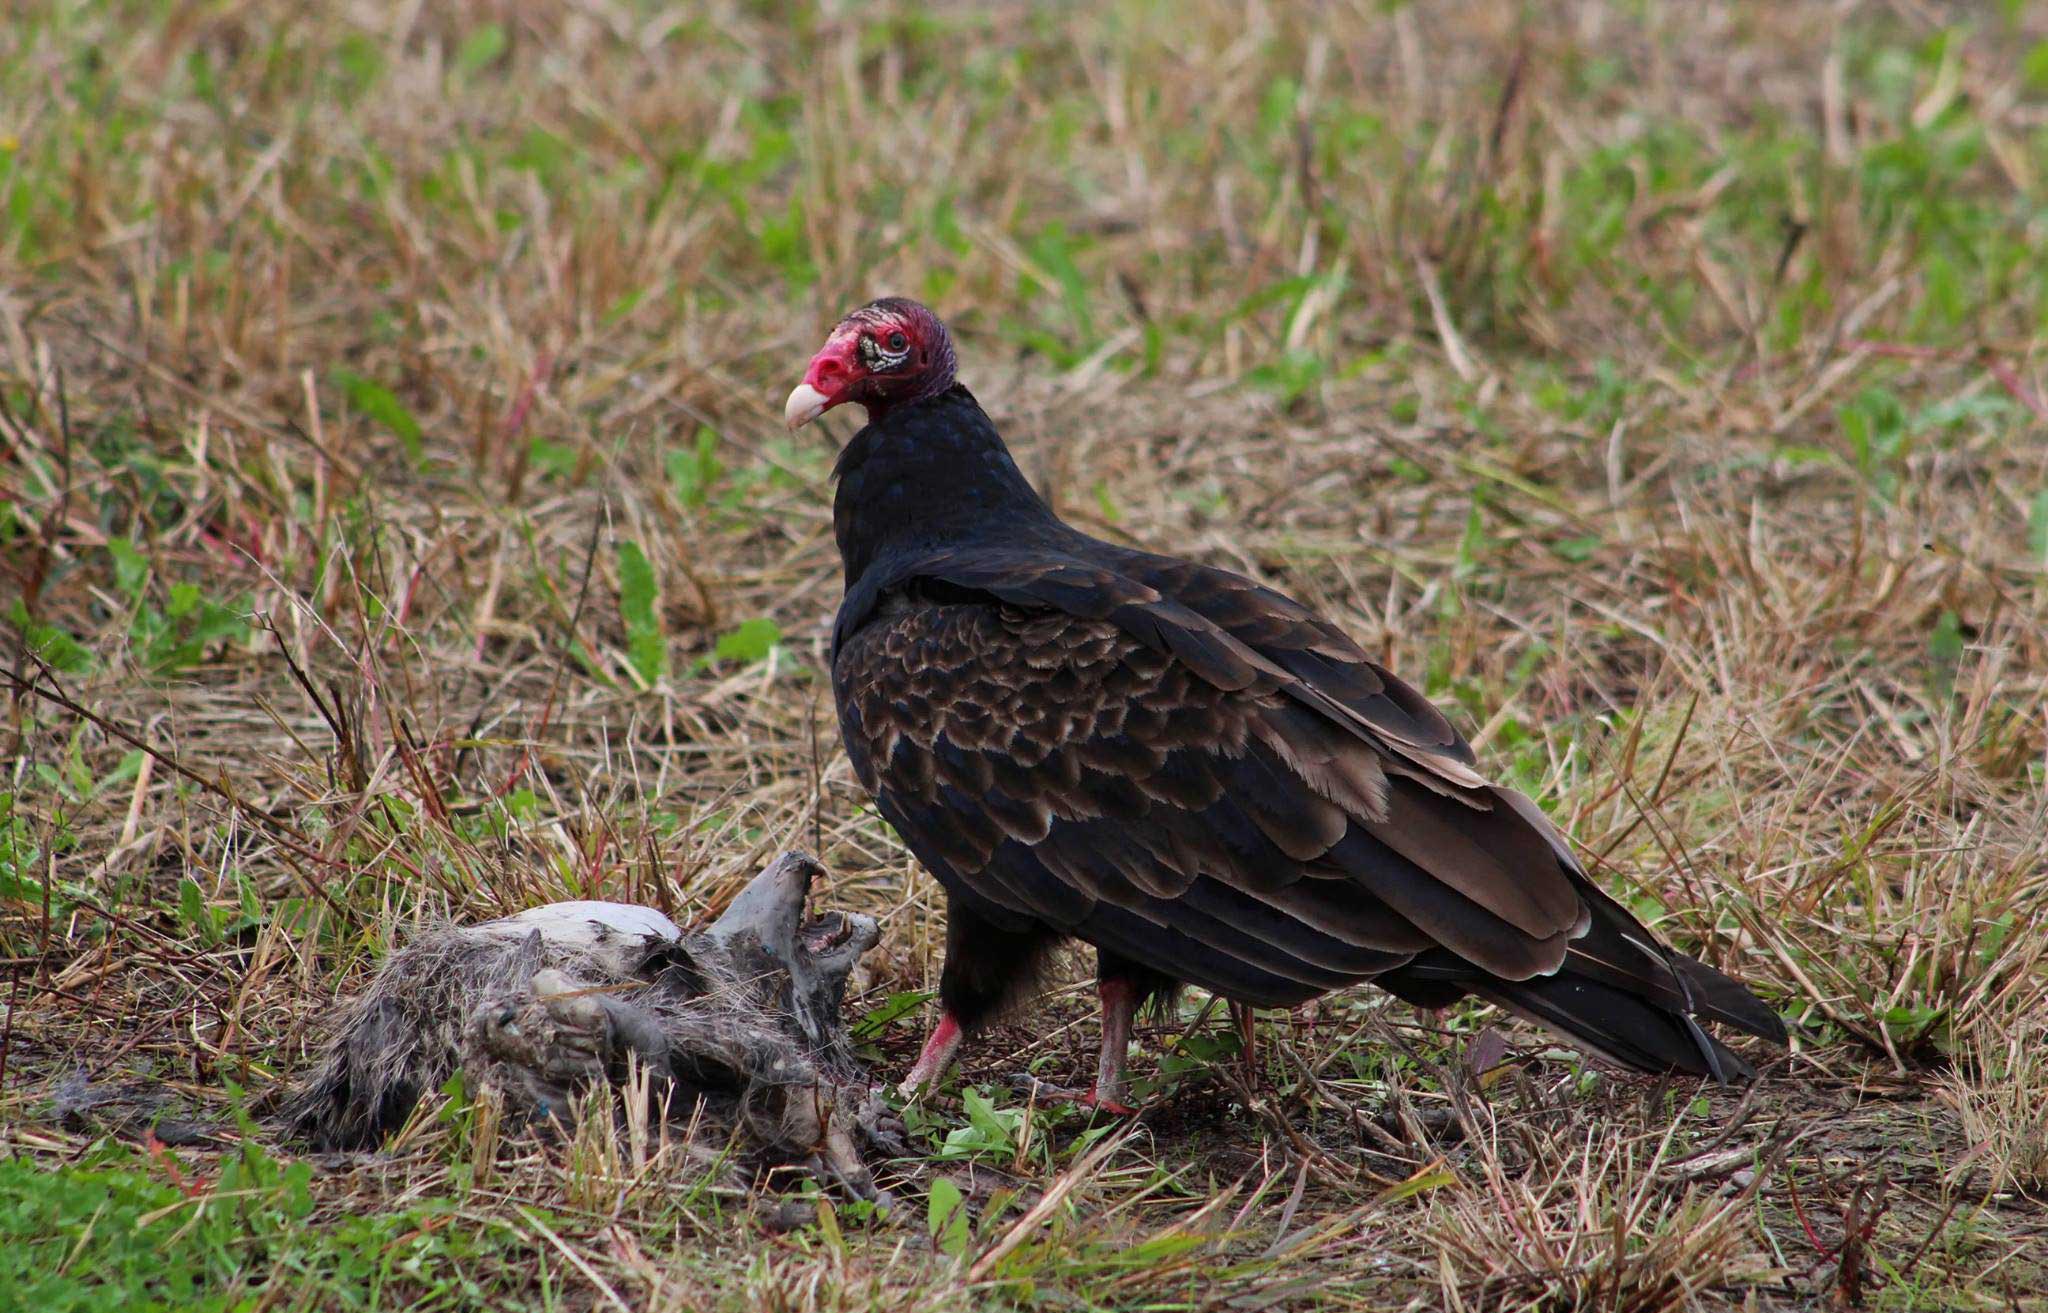 A turkey vulture eating carrion.